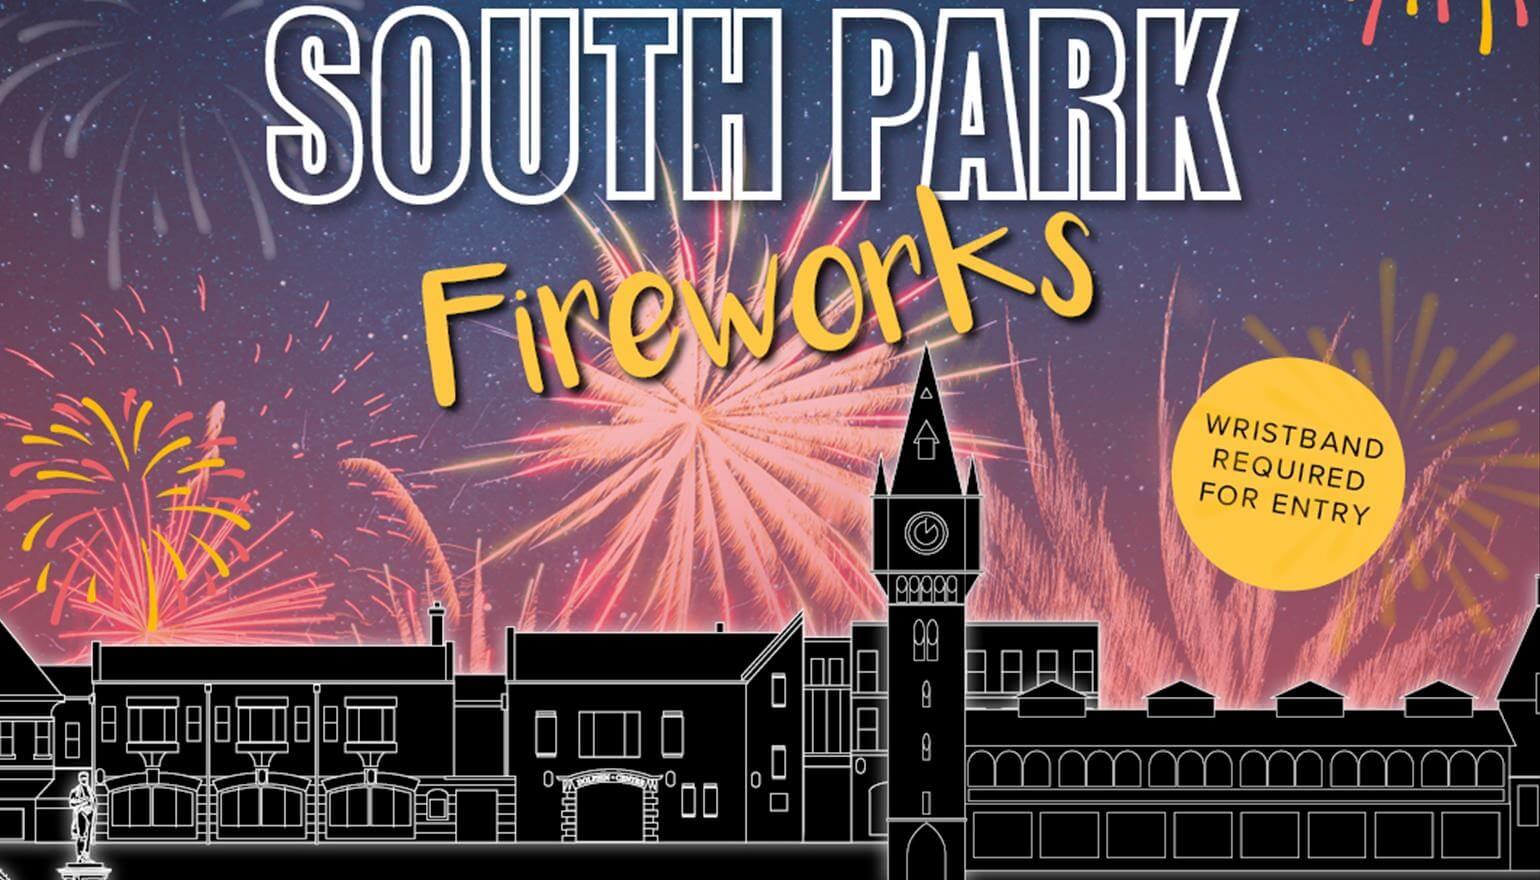 Countdown to South Park Fireworks begins!